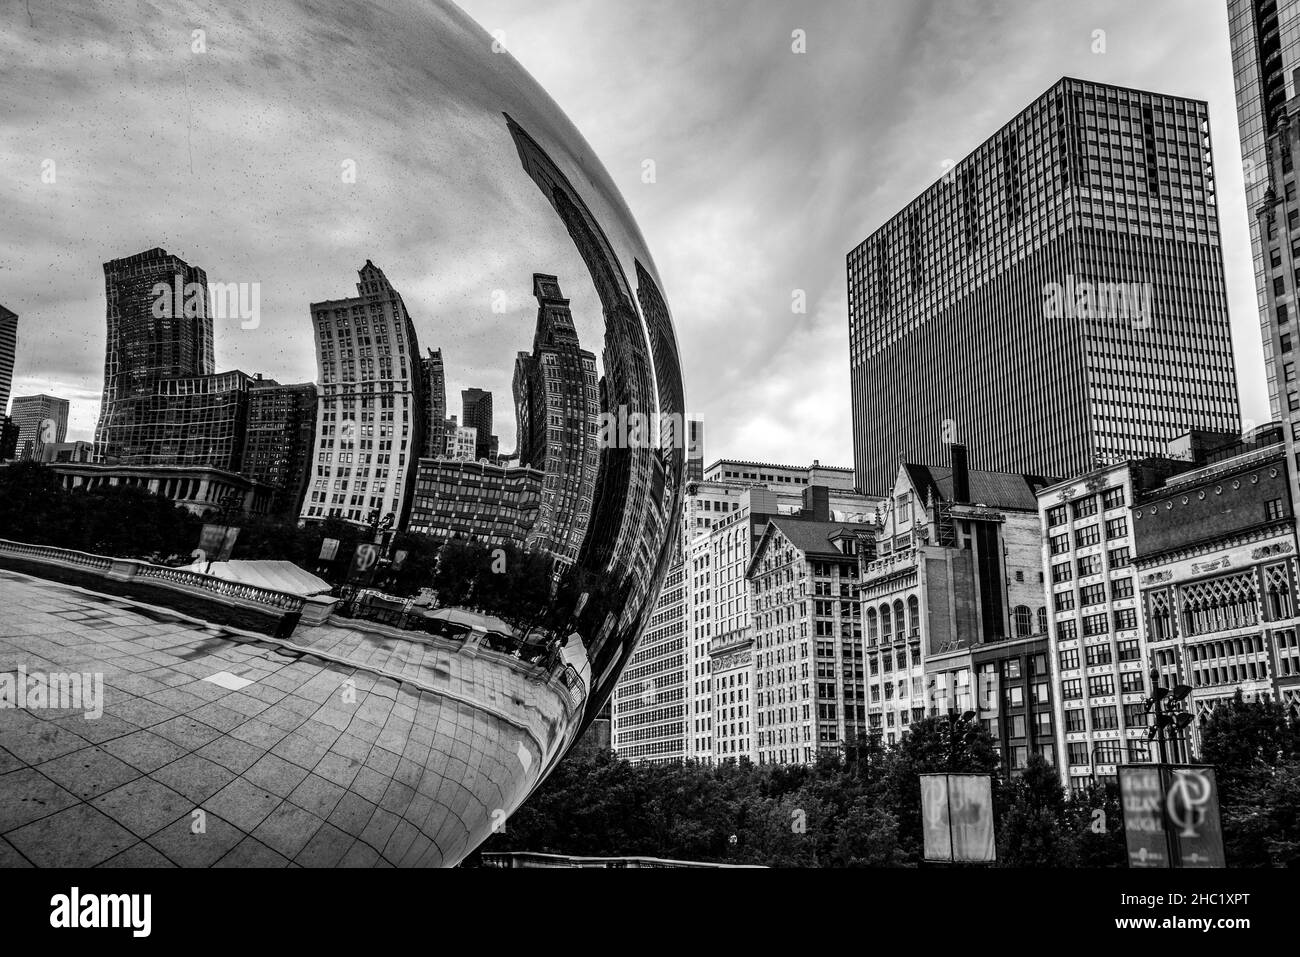 CHICAGO, USA - AUGUST 29, 2019: Iconic Millennium Egg and the Chicago skyline, USA Stock Photo